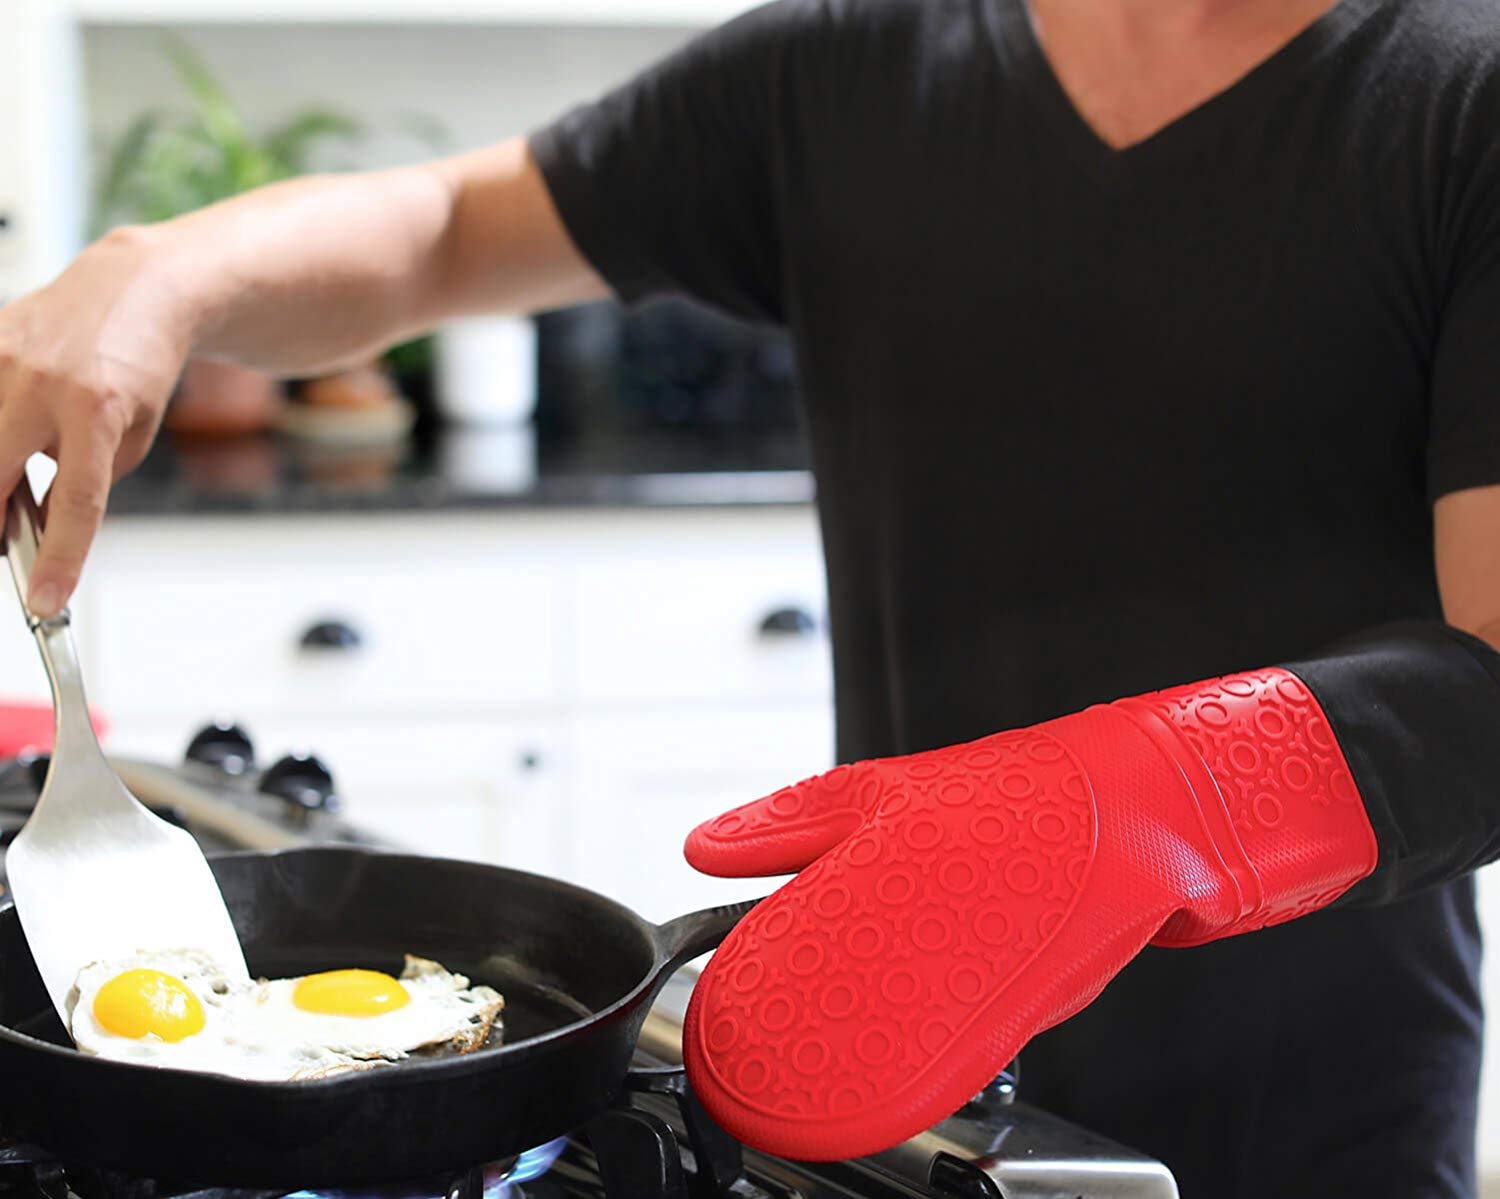 J&A MARTS Oven Gloves Heat Resistant Double Ovens Mitt With Non-Slip Silicone Design For Perfect Grip Baking Black Grilling Potholders For Kitchen Barbecue Cooking 